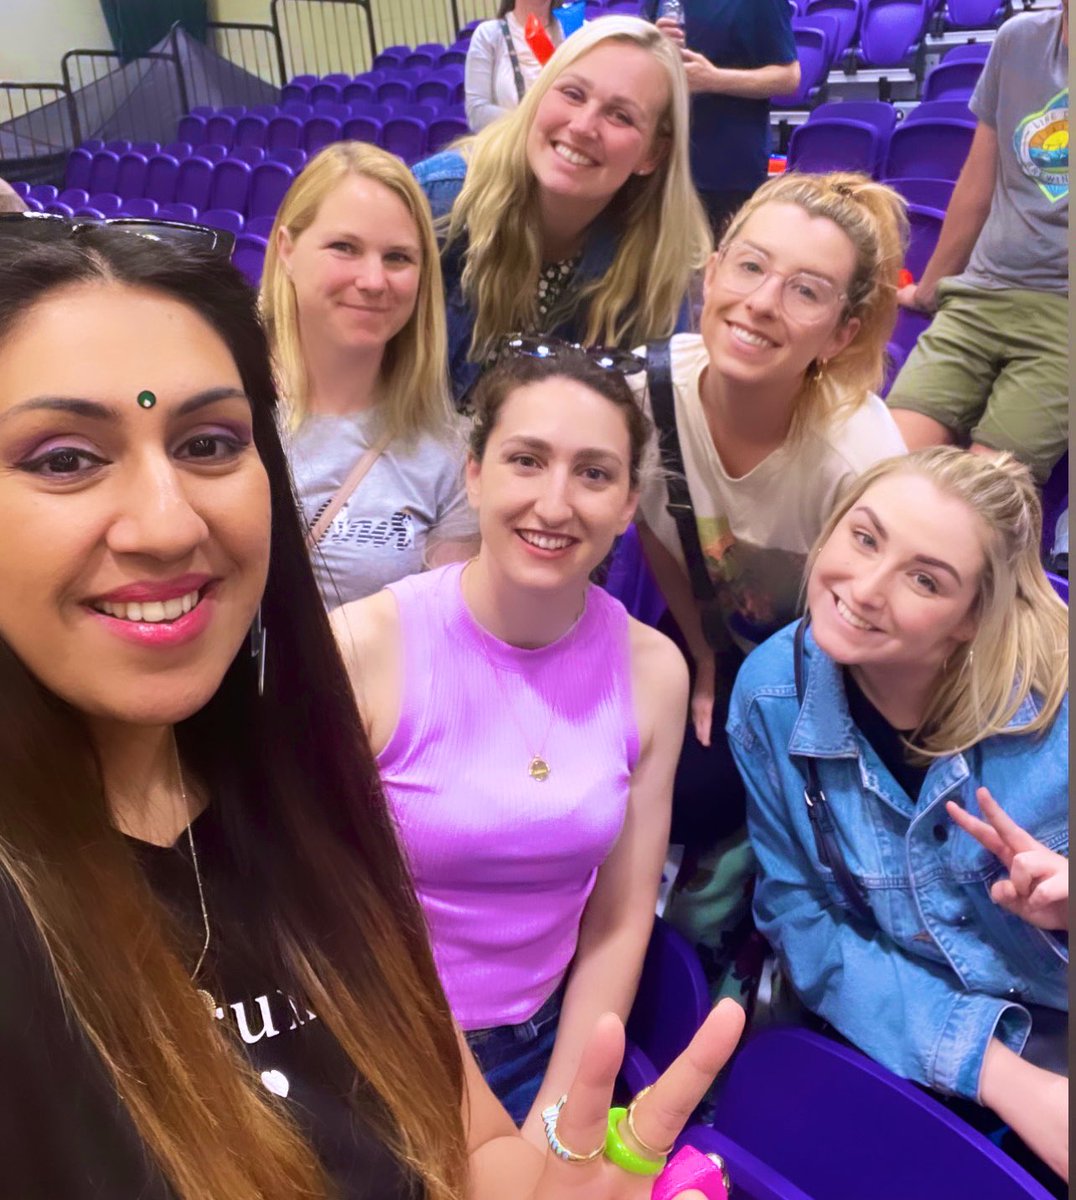 We were so loud! Super proud of the @LboroLightning team today and lost my voice cheering on @alice_harveyx That ponytail magic was back again  baby!! Fan club is ⬇️ Hannah Joseph’s passes were 🔥🔥 #QueensRaiseQueens #FemaleSport #WeBroughtTheNoise #LoudGobs 🤩⚡️#GirlGang 💜🤍